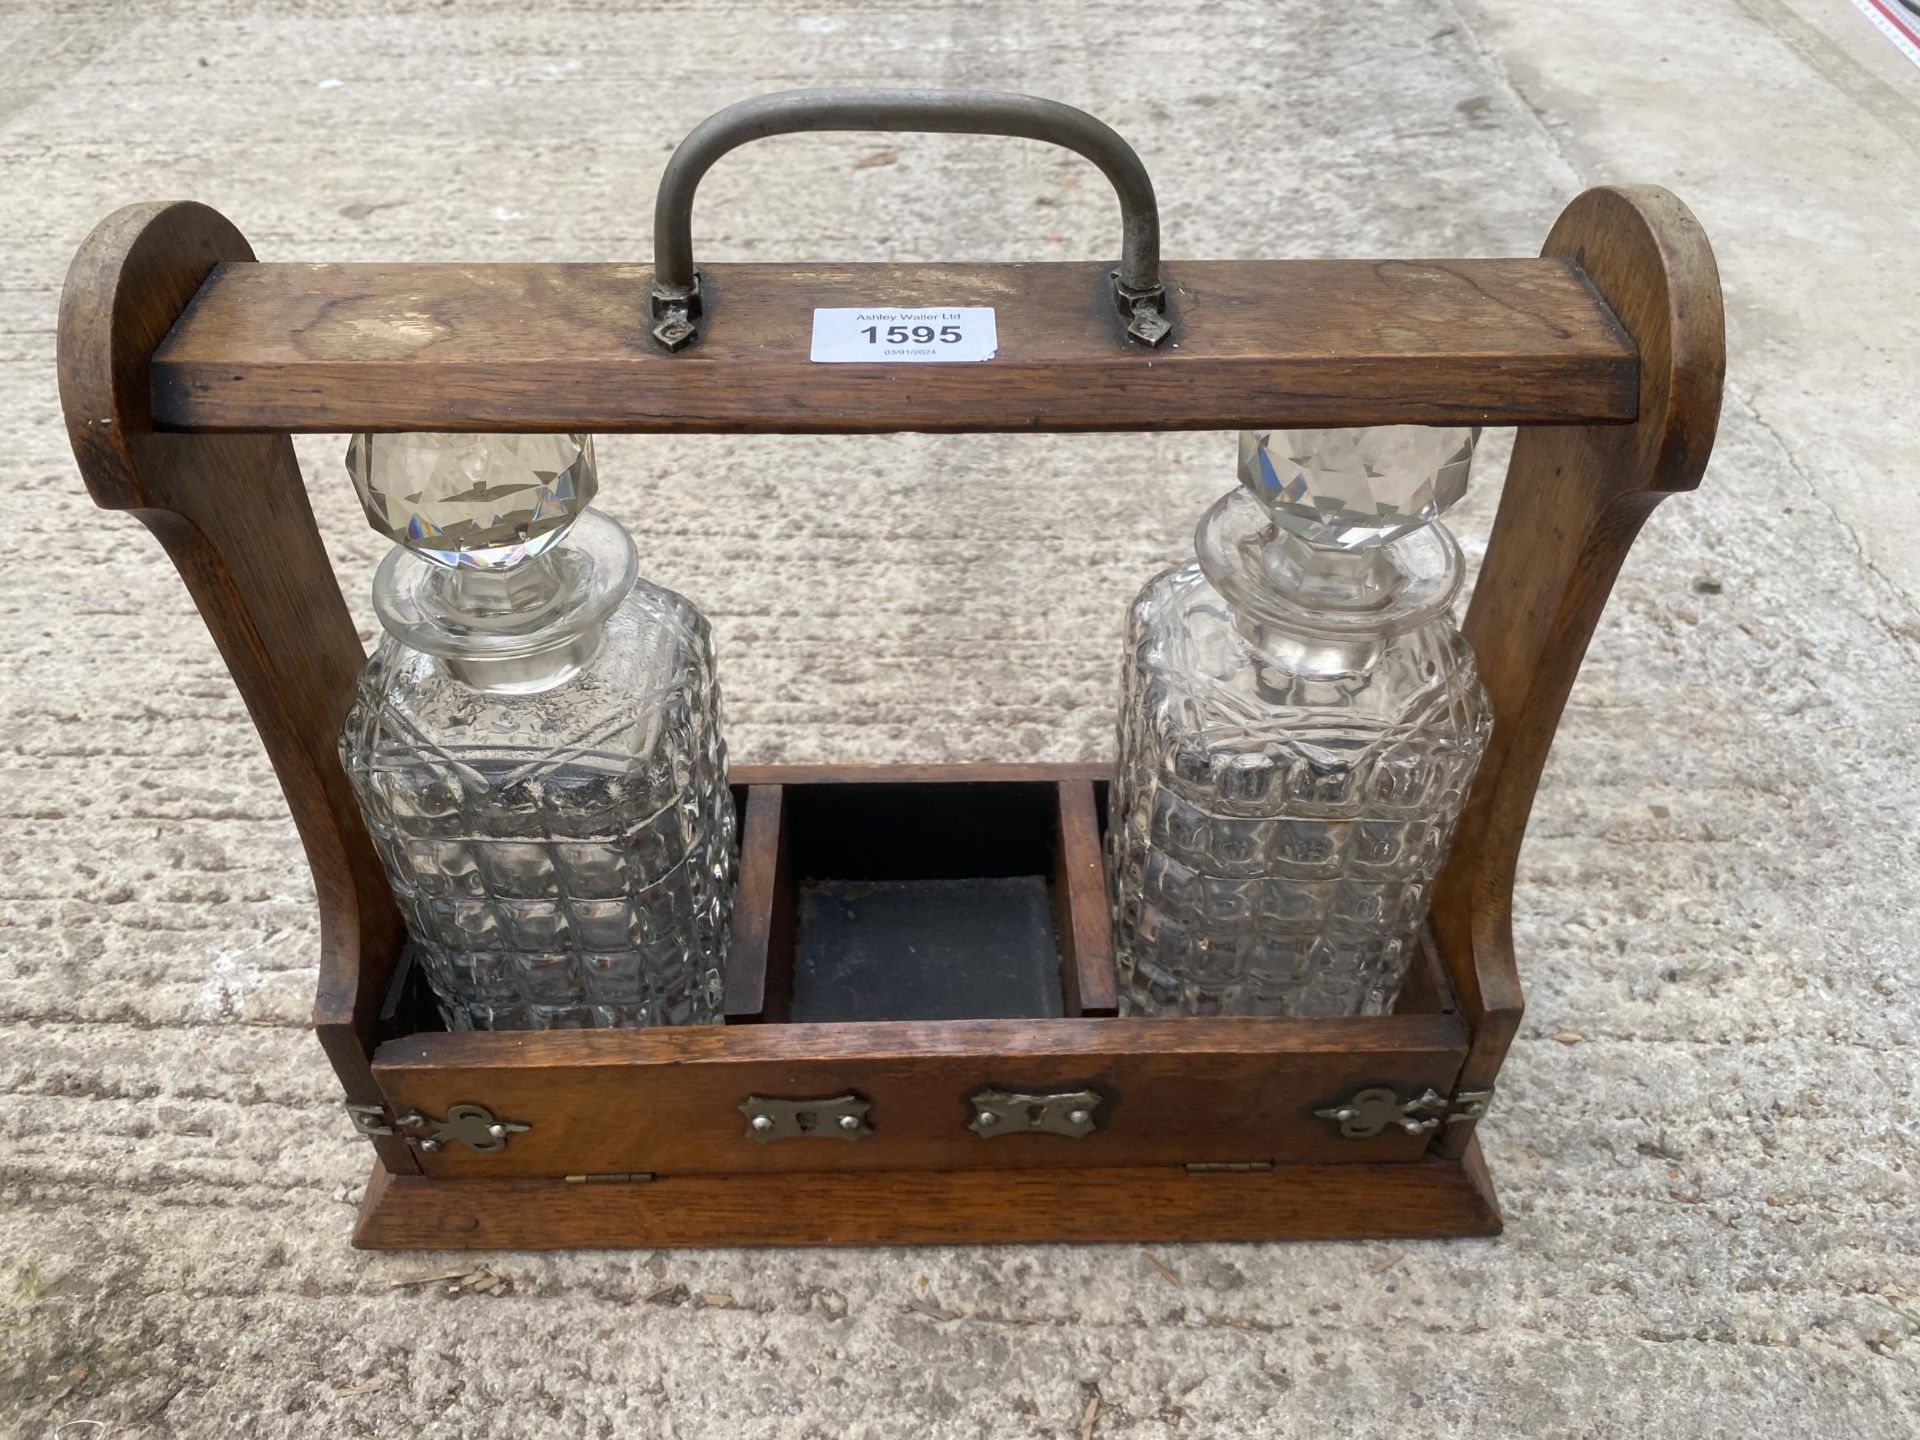 A VINTAGE OAK TANTALUS DECANTER HOLDER WITH TWO GLASS DECANTERS AND SILVER PLATE DETAIL